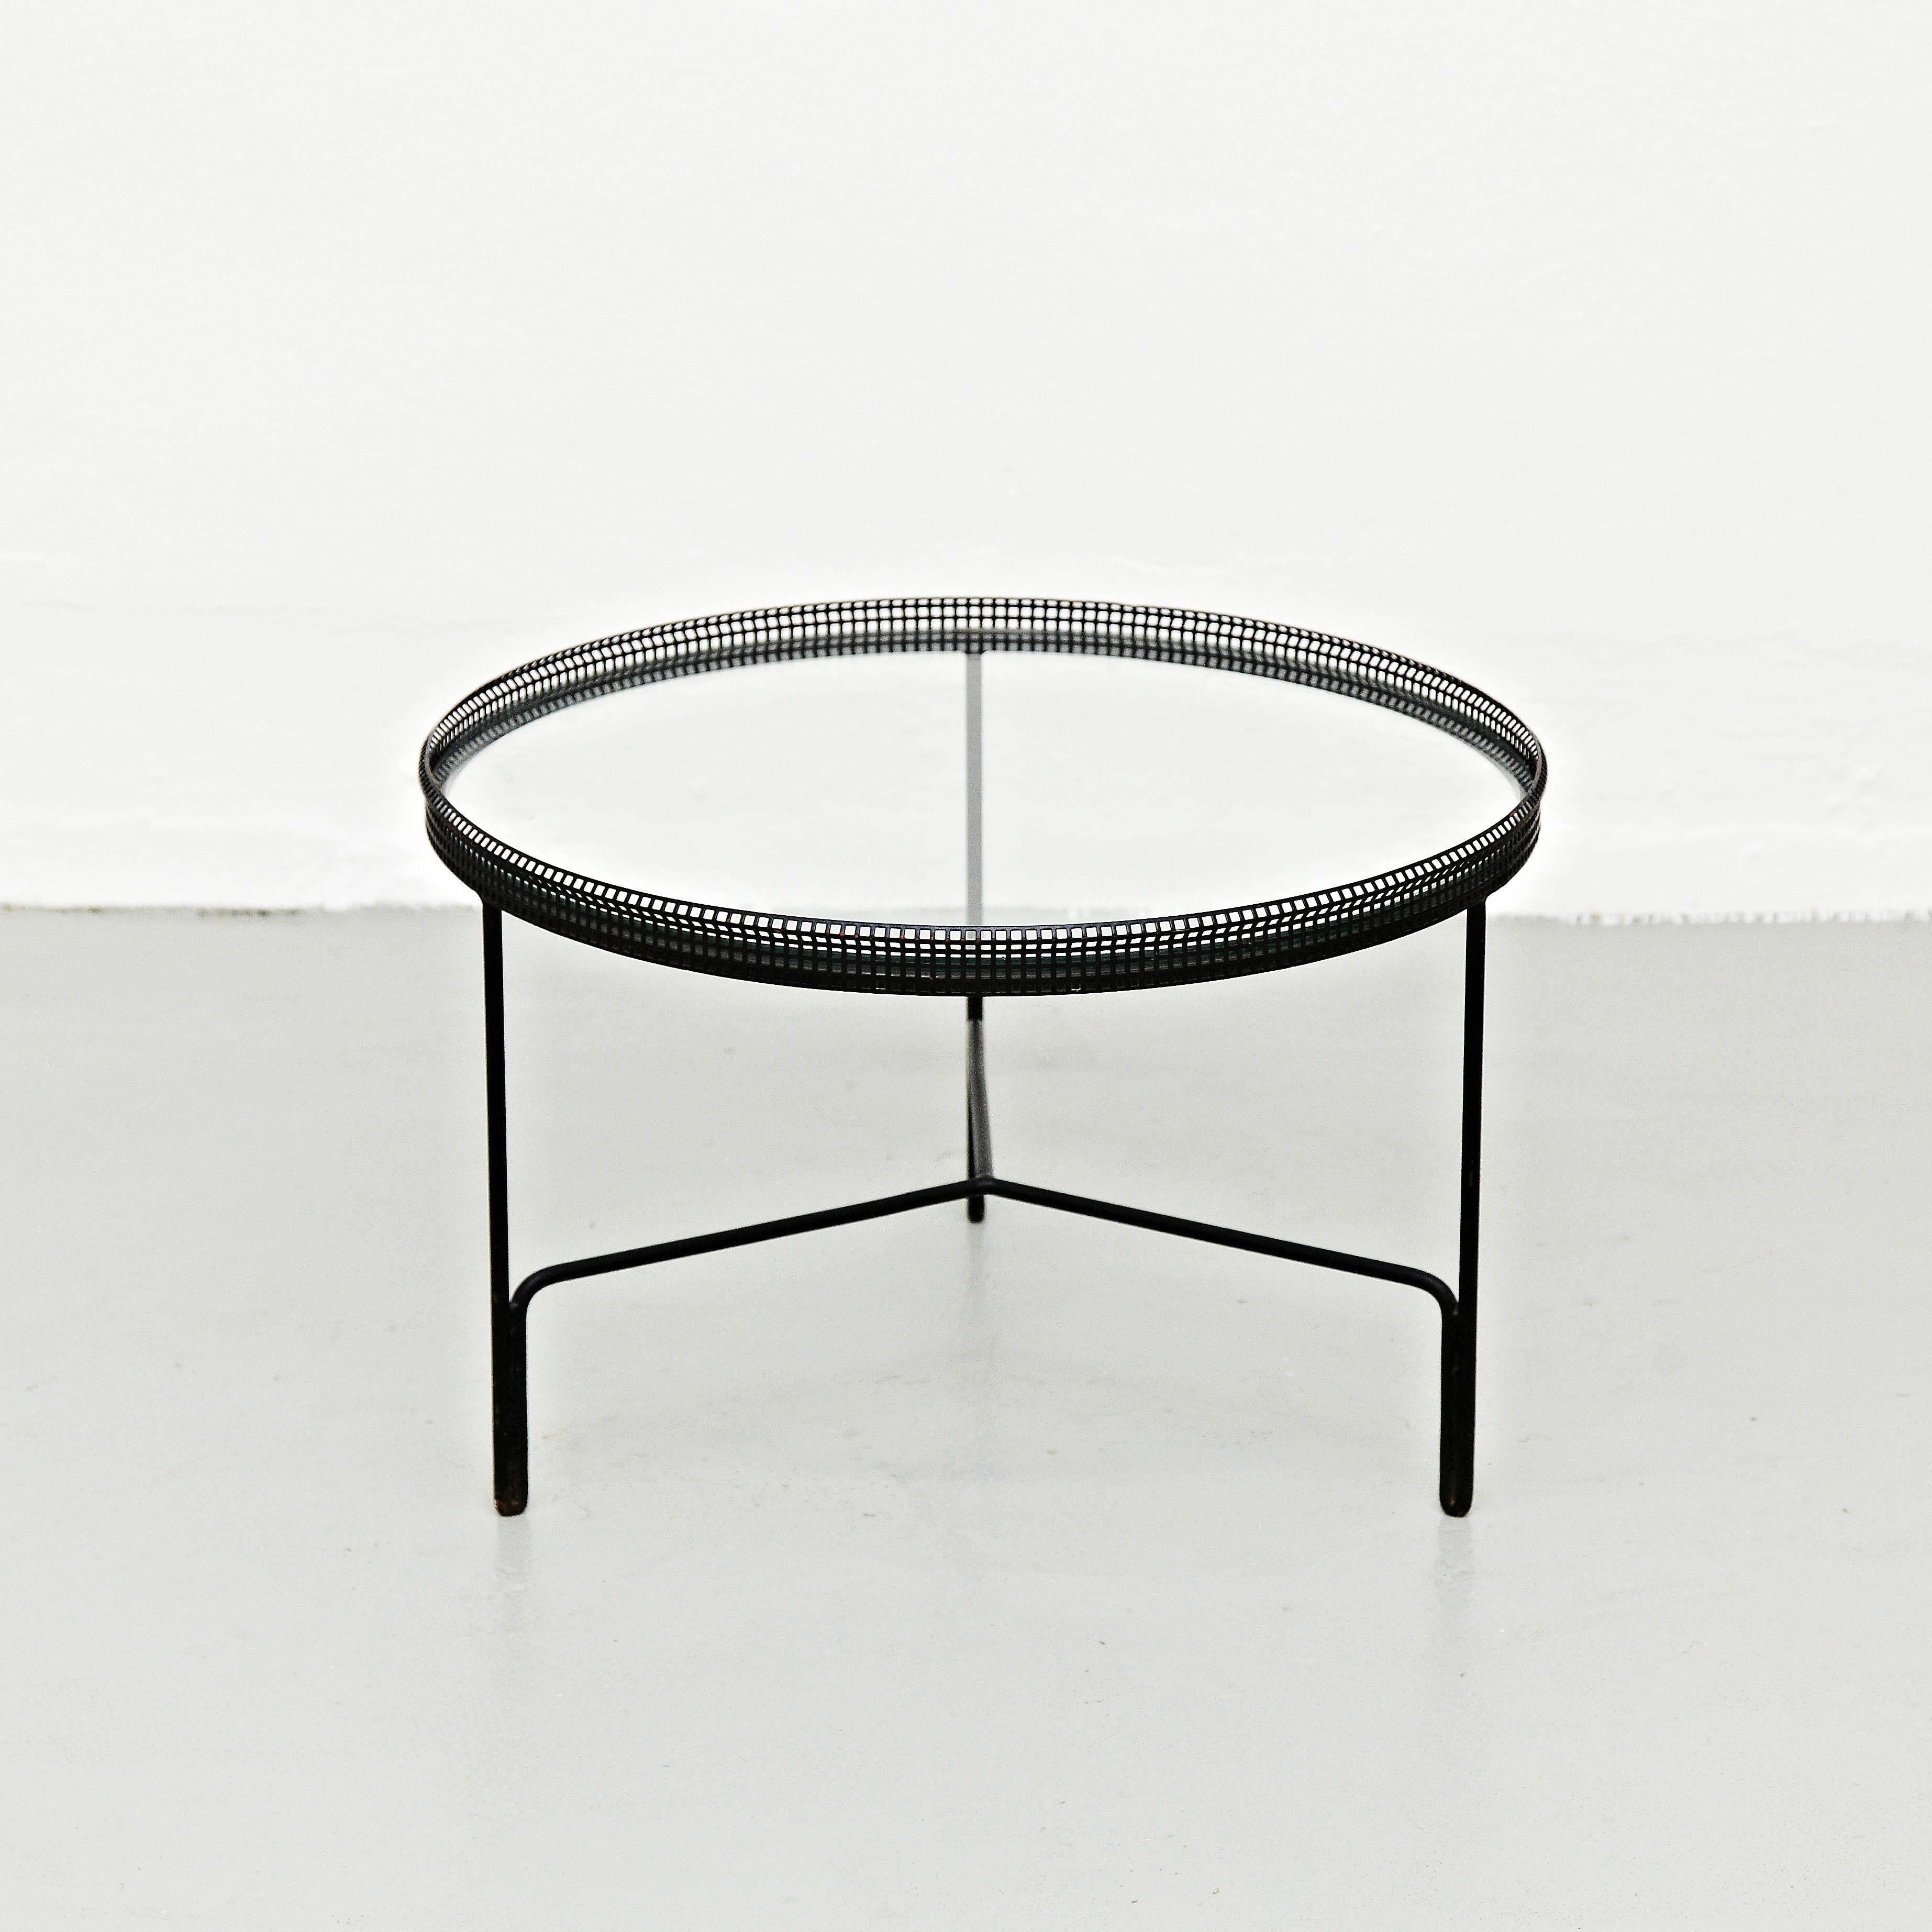 Coffee table designed by Mathieu Matégot.
Manufactured by Ateliers Matégot, (France), circa 1950.
Lacquered perforated metal with original paint.

In good original condition, with minor wear consistent with age and use, preserving a beautiful